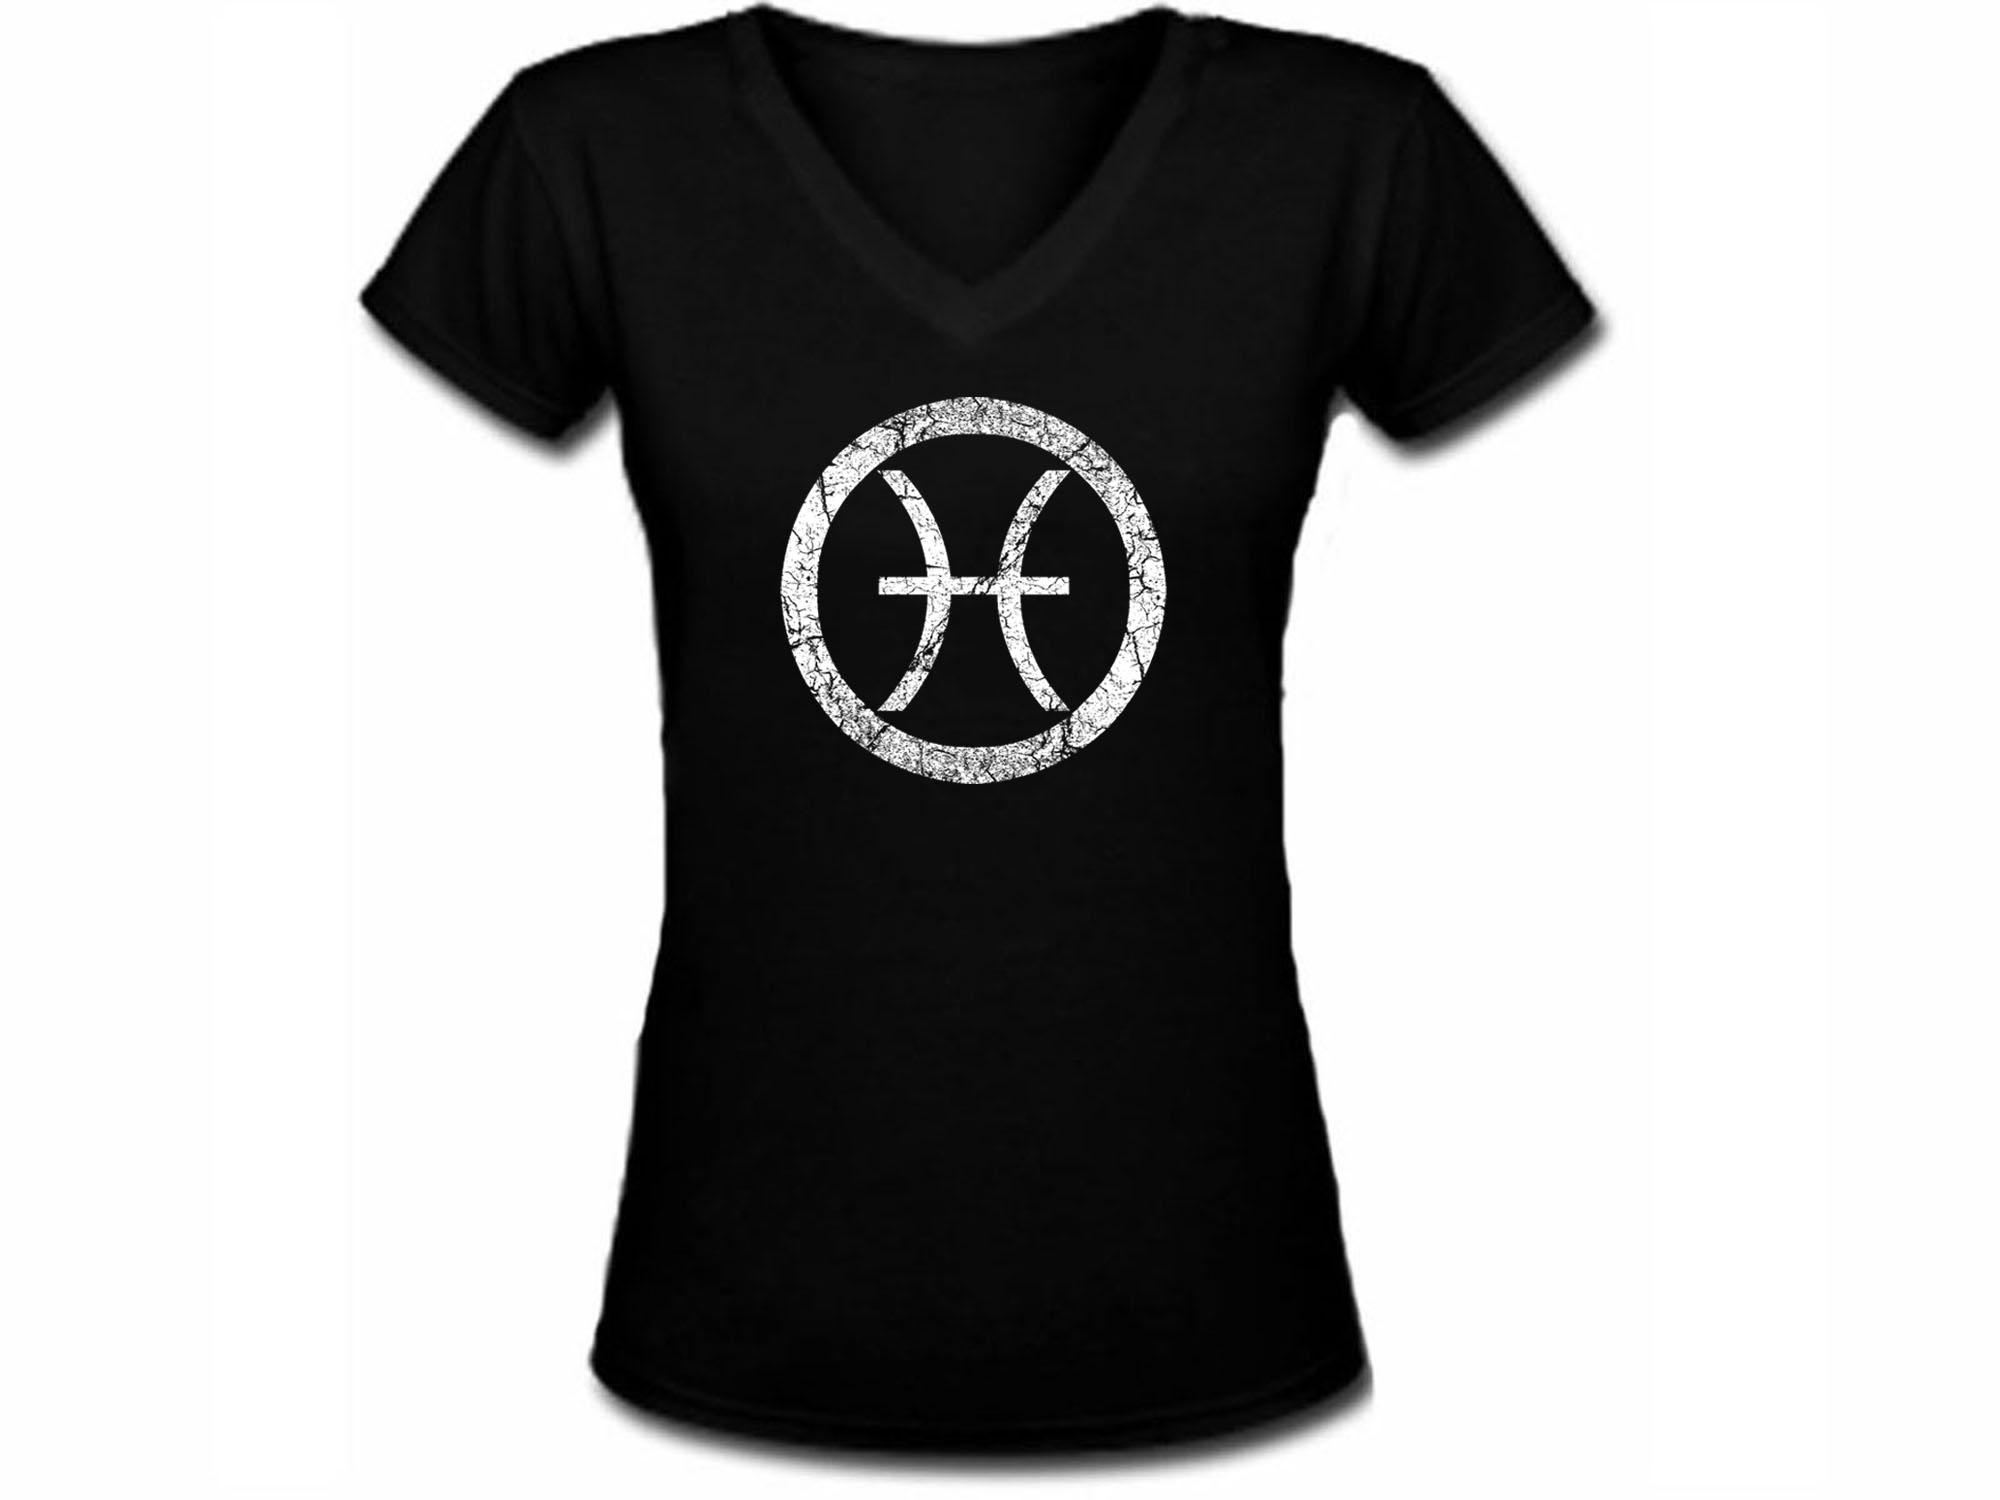 Pisces horoscope zodiac sign distressed look t-shirt for women or teenagers